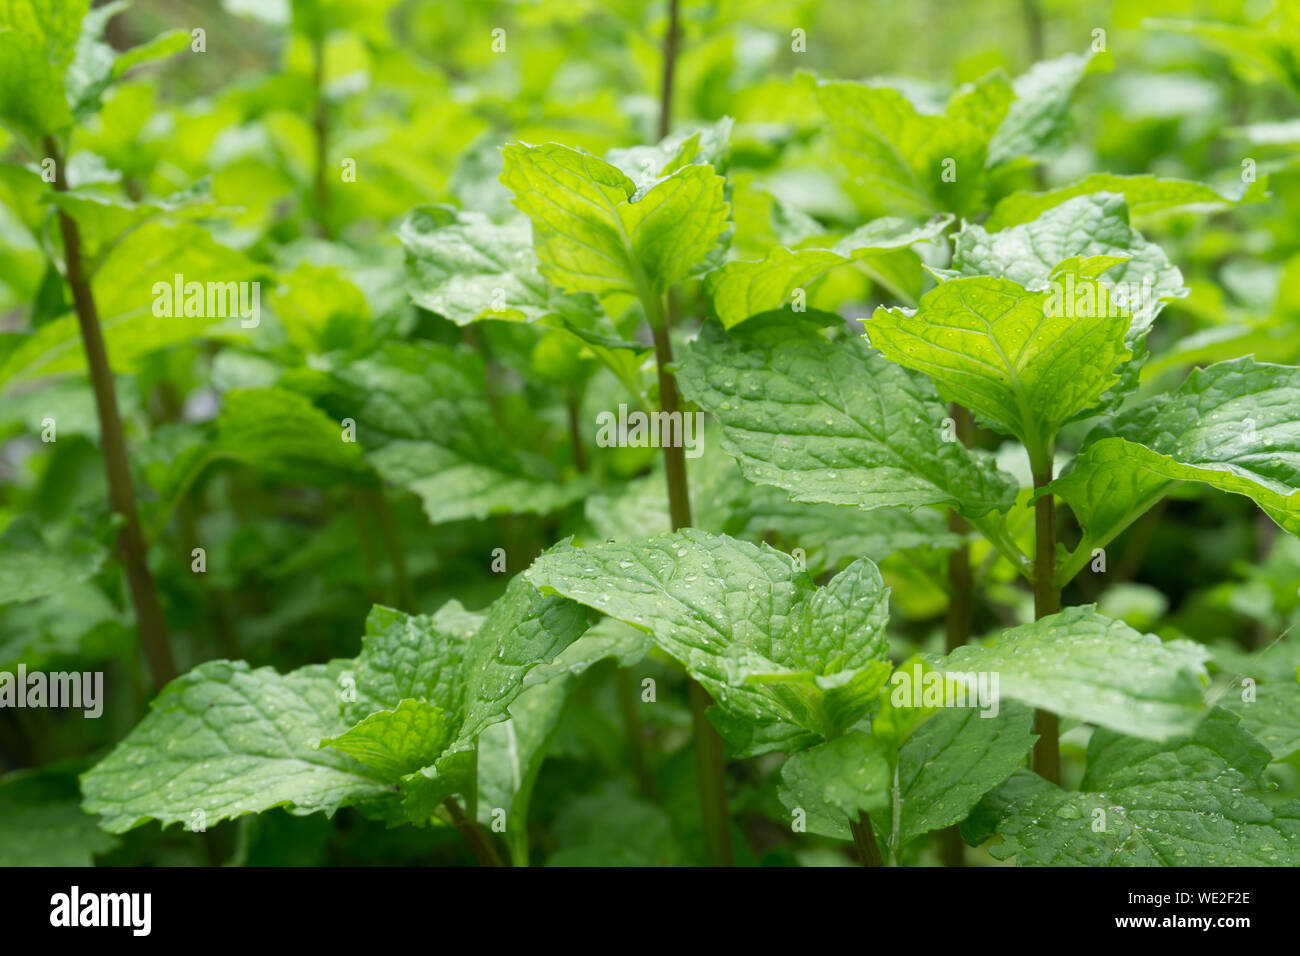 High Angle View Of Mint Leaf Plants Stock Photo